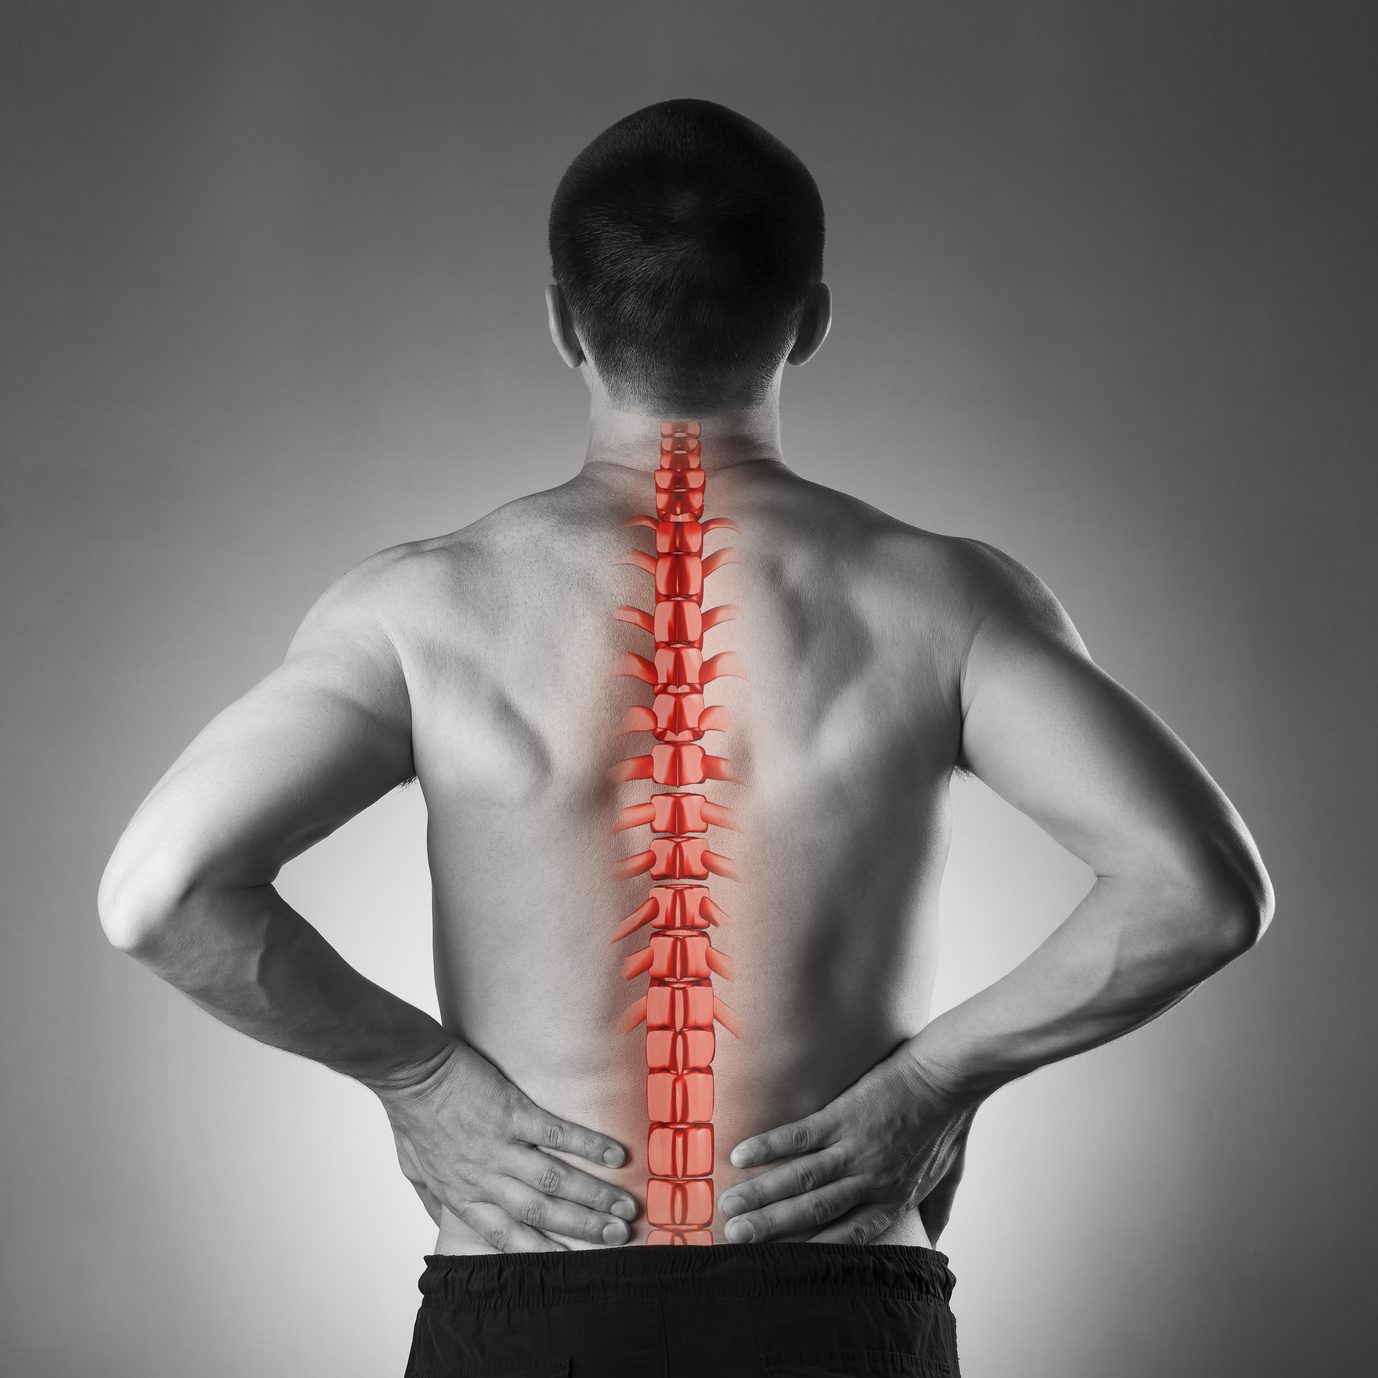 Spine pain, man with backache and ache in the neck, black and white photo with red backbone